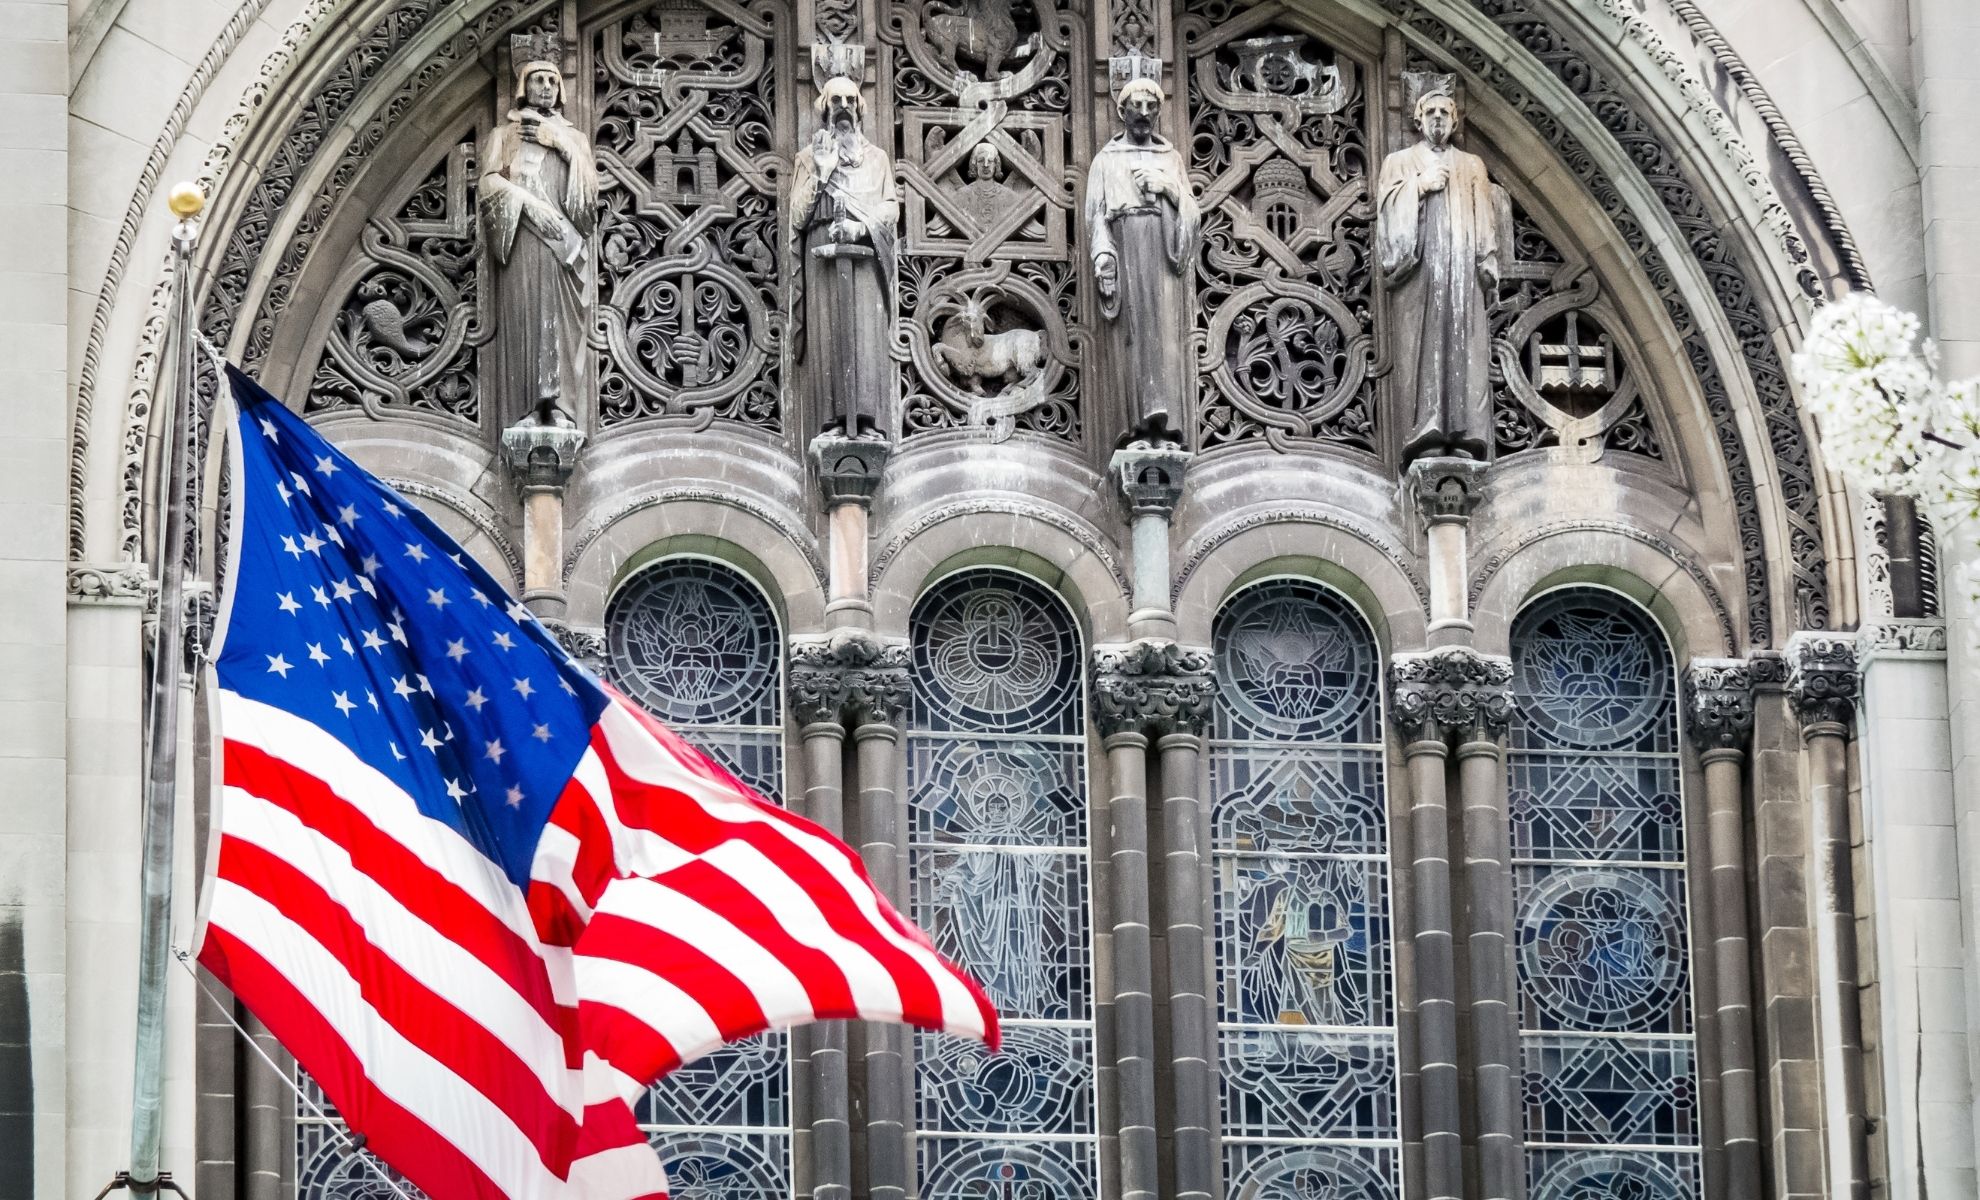 The flag waving in front of St Bart's Episcopal Church in New York City. (Source : Getty Images)